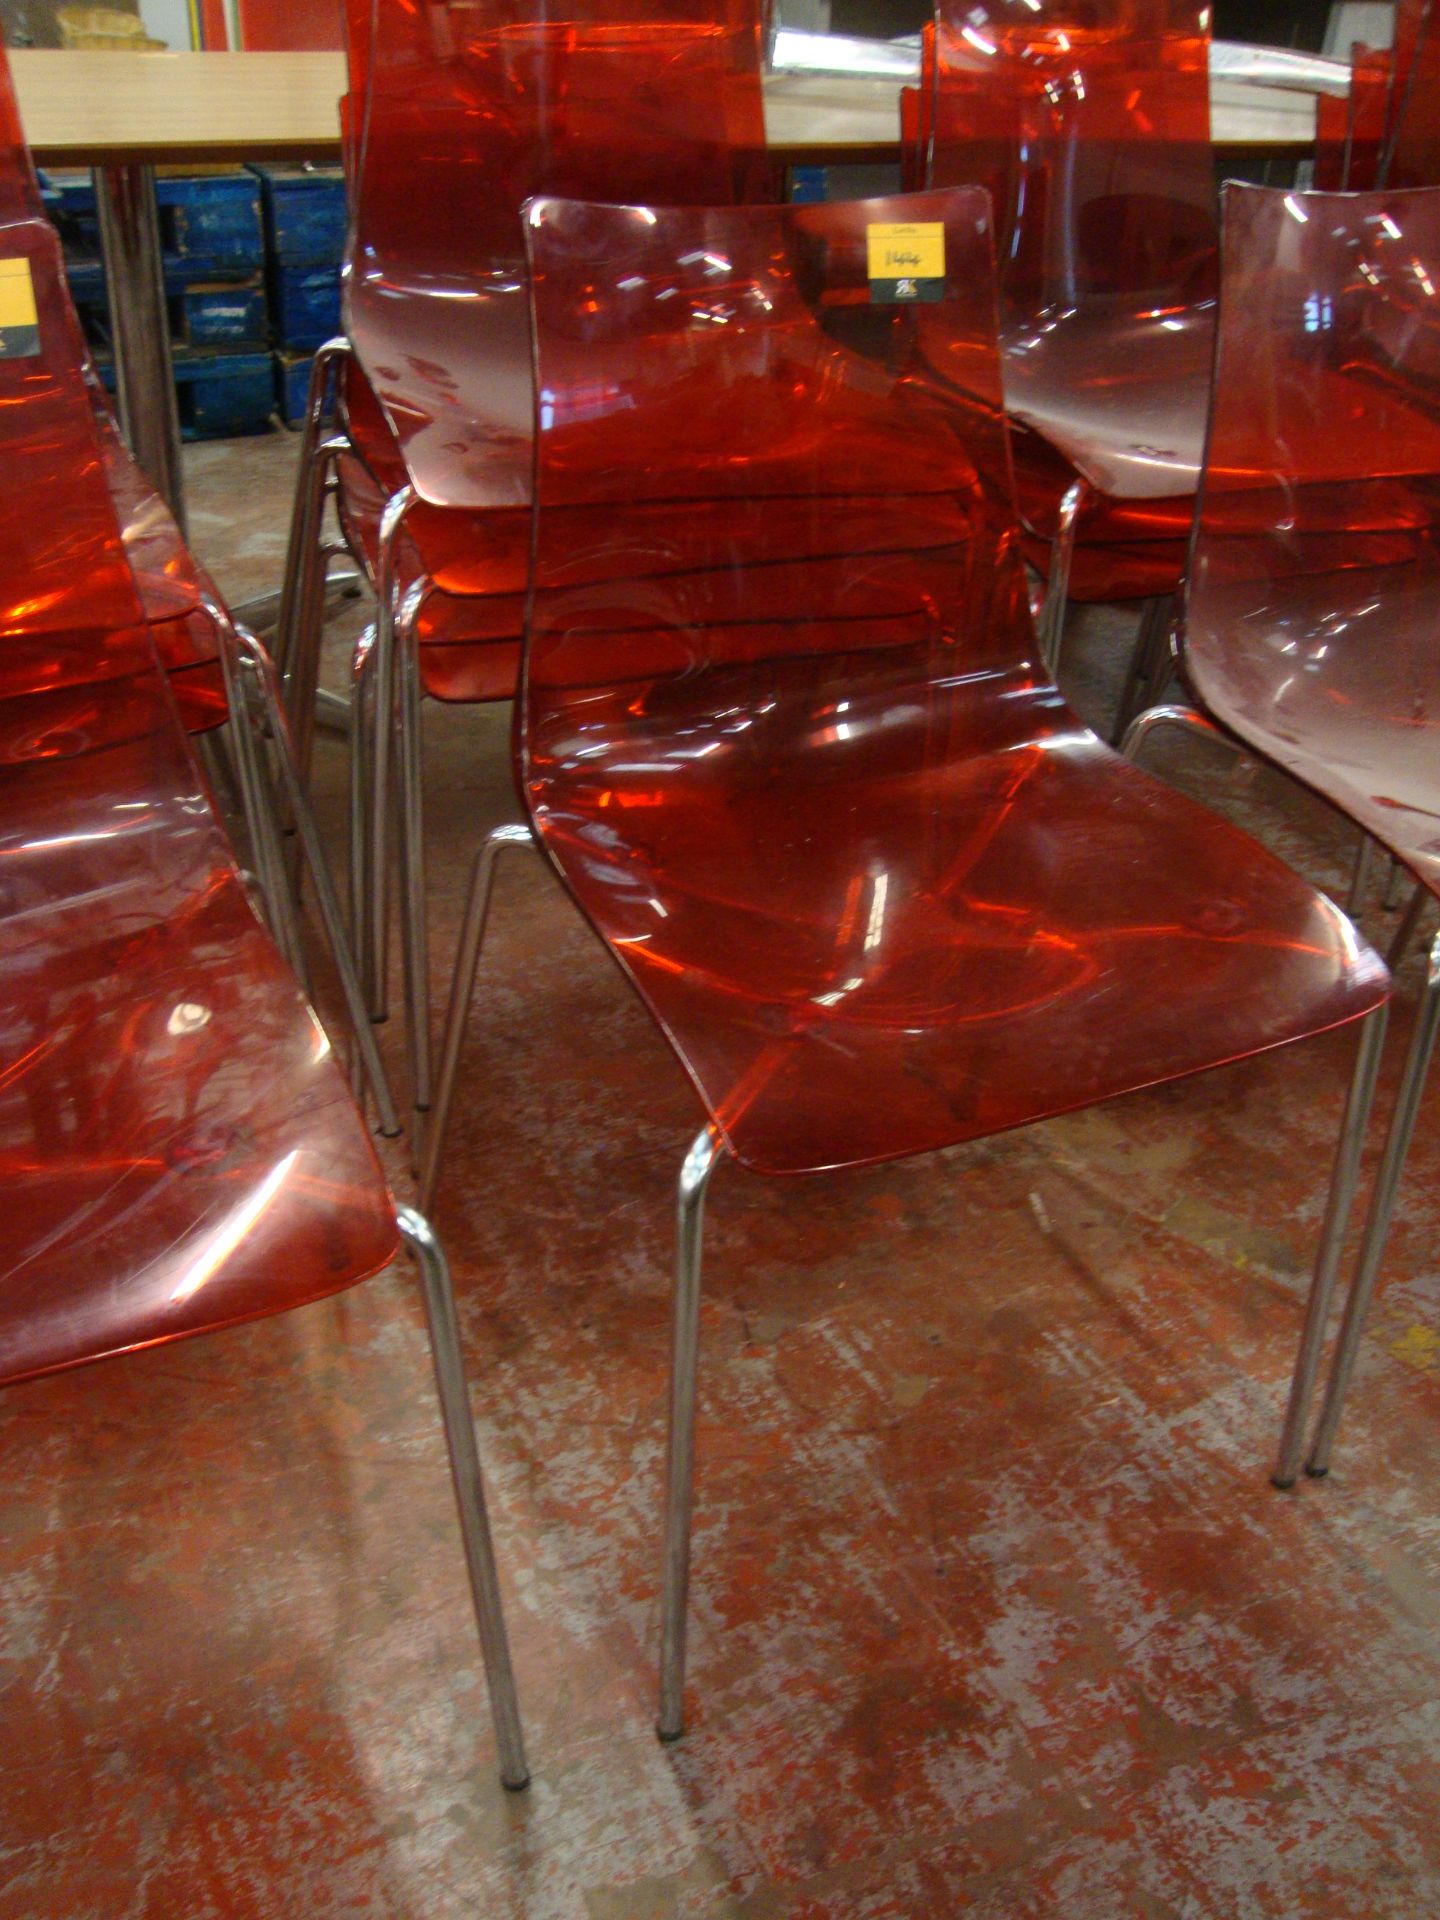 9 off matching red clear plastic chairs on metal legs. NB lots 138 - 145 consist of different - Image 3 of 3